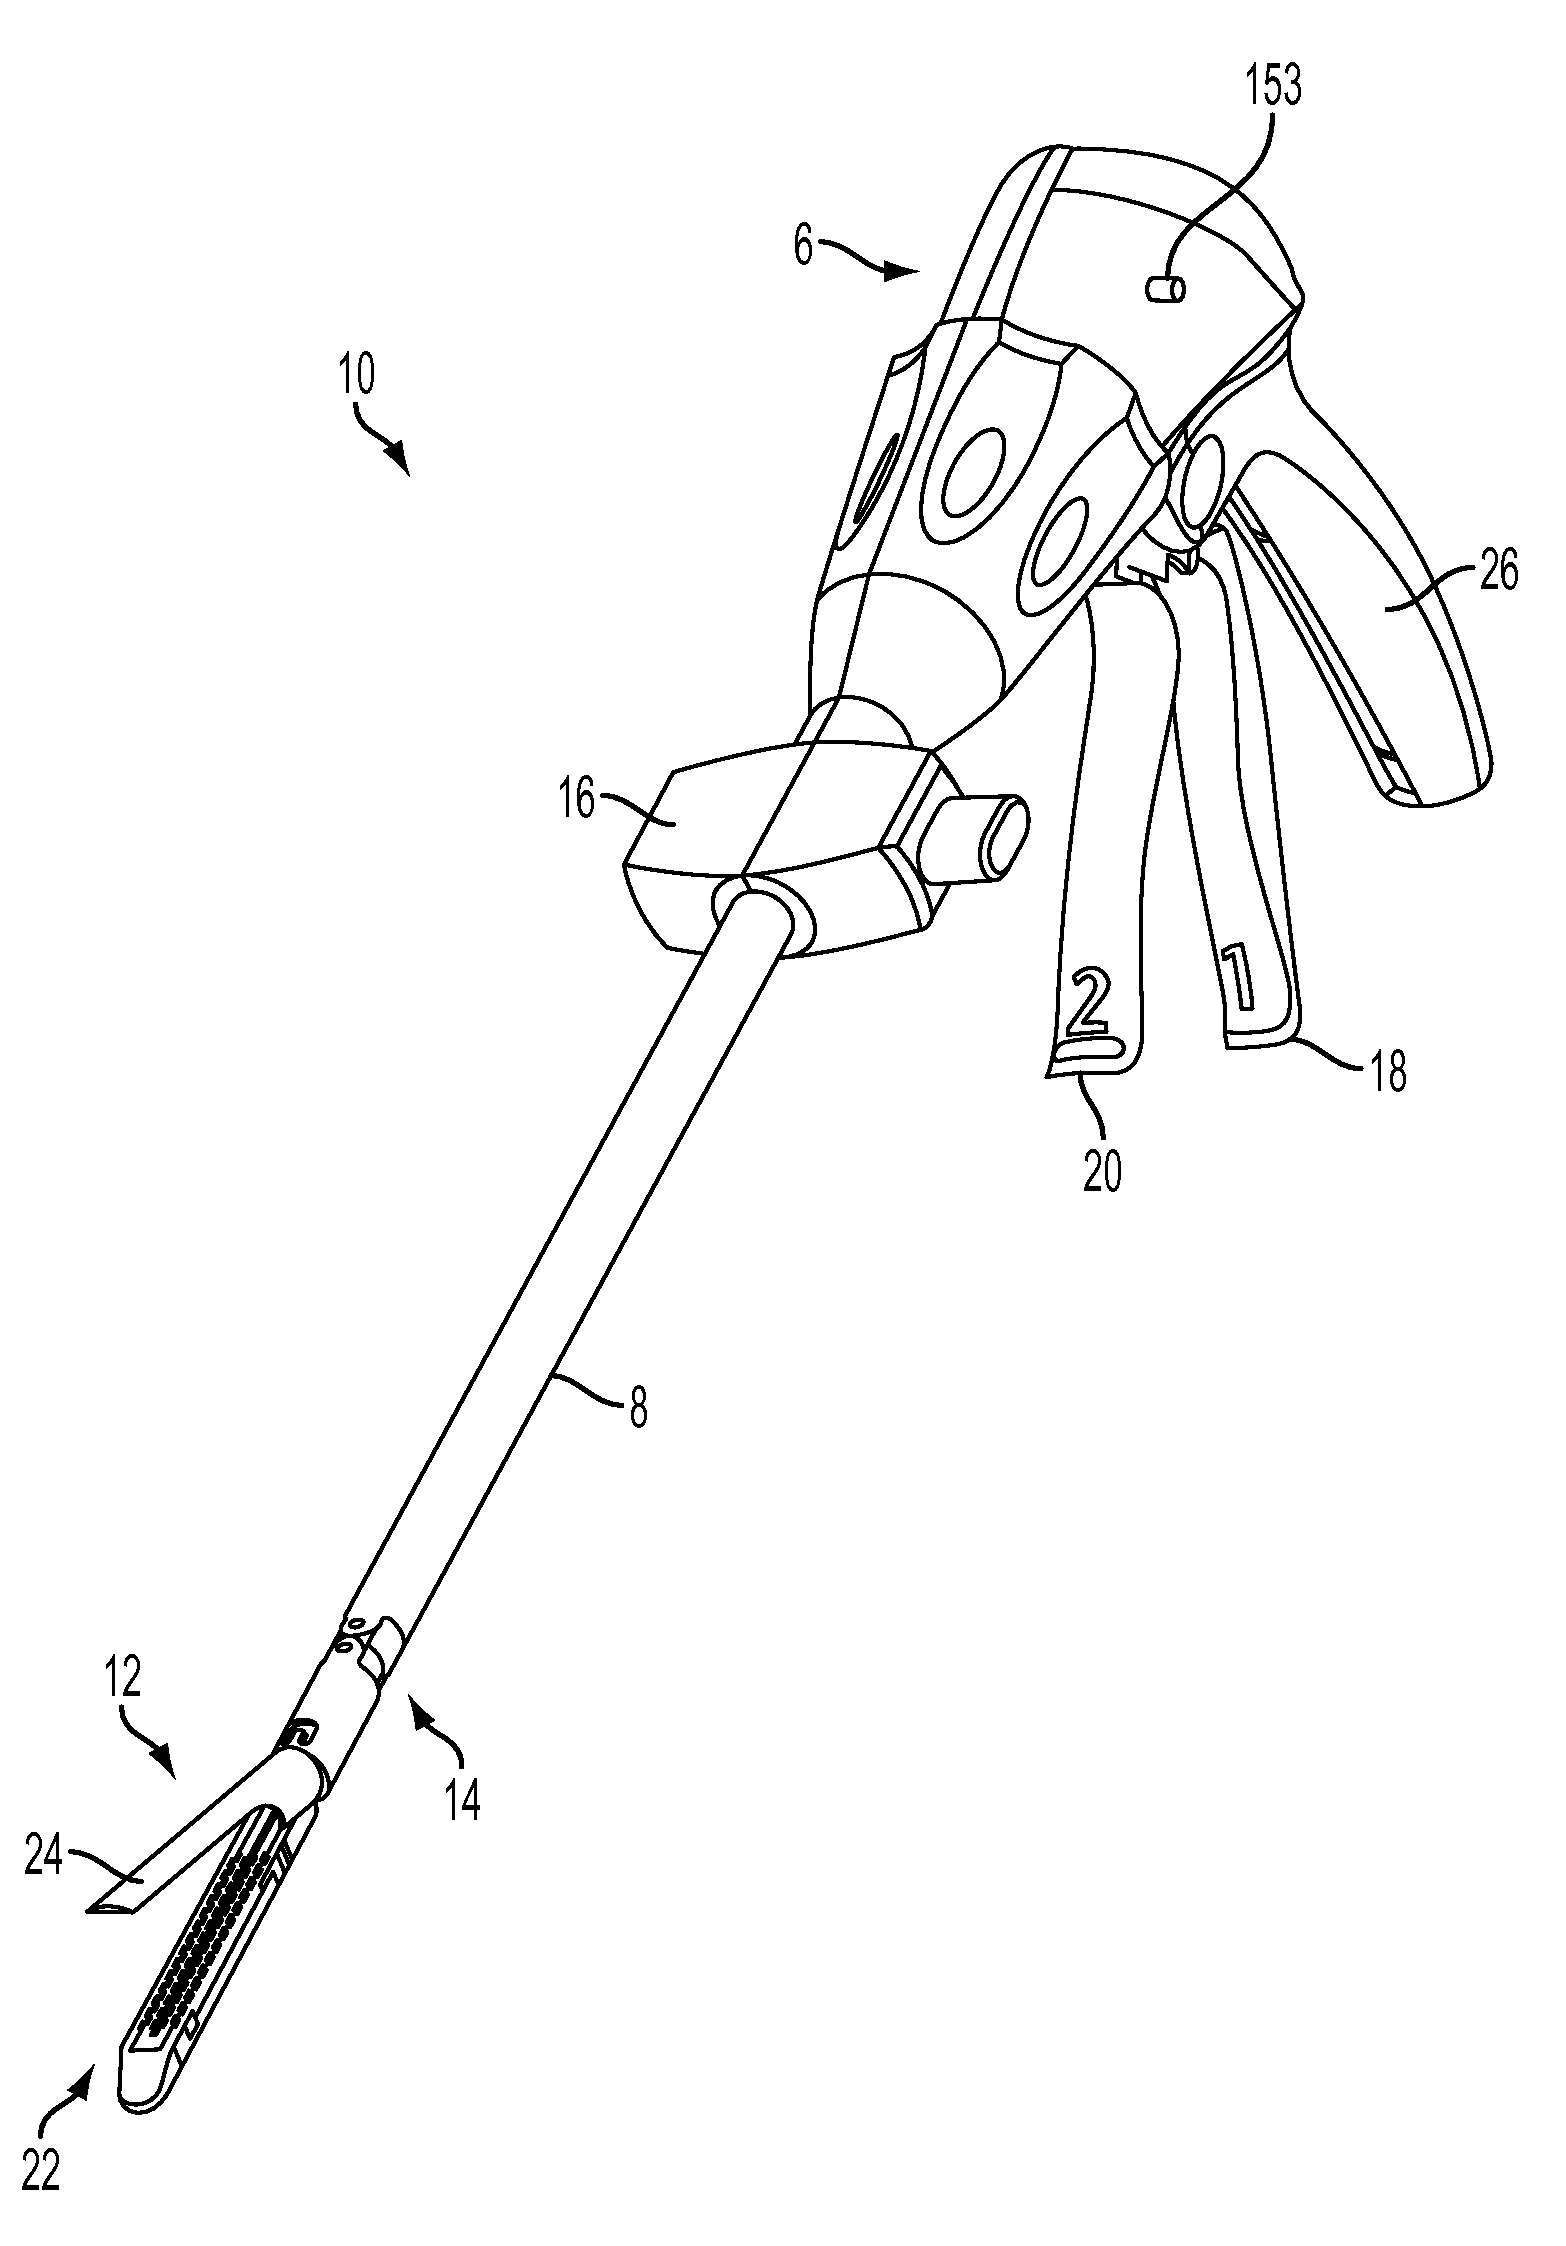 Motor driven surgical fastener device with mechanisms for adjusting a tissue gap within the end effector